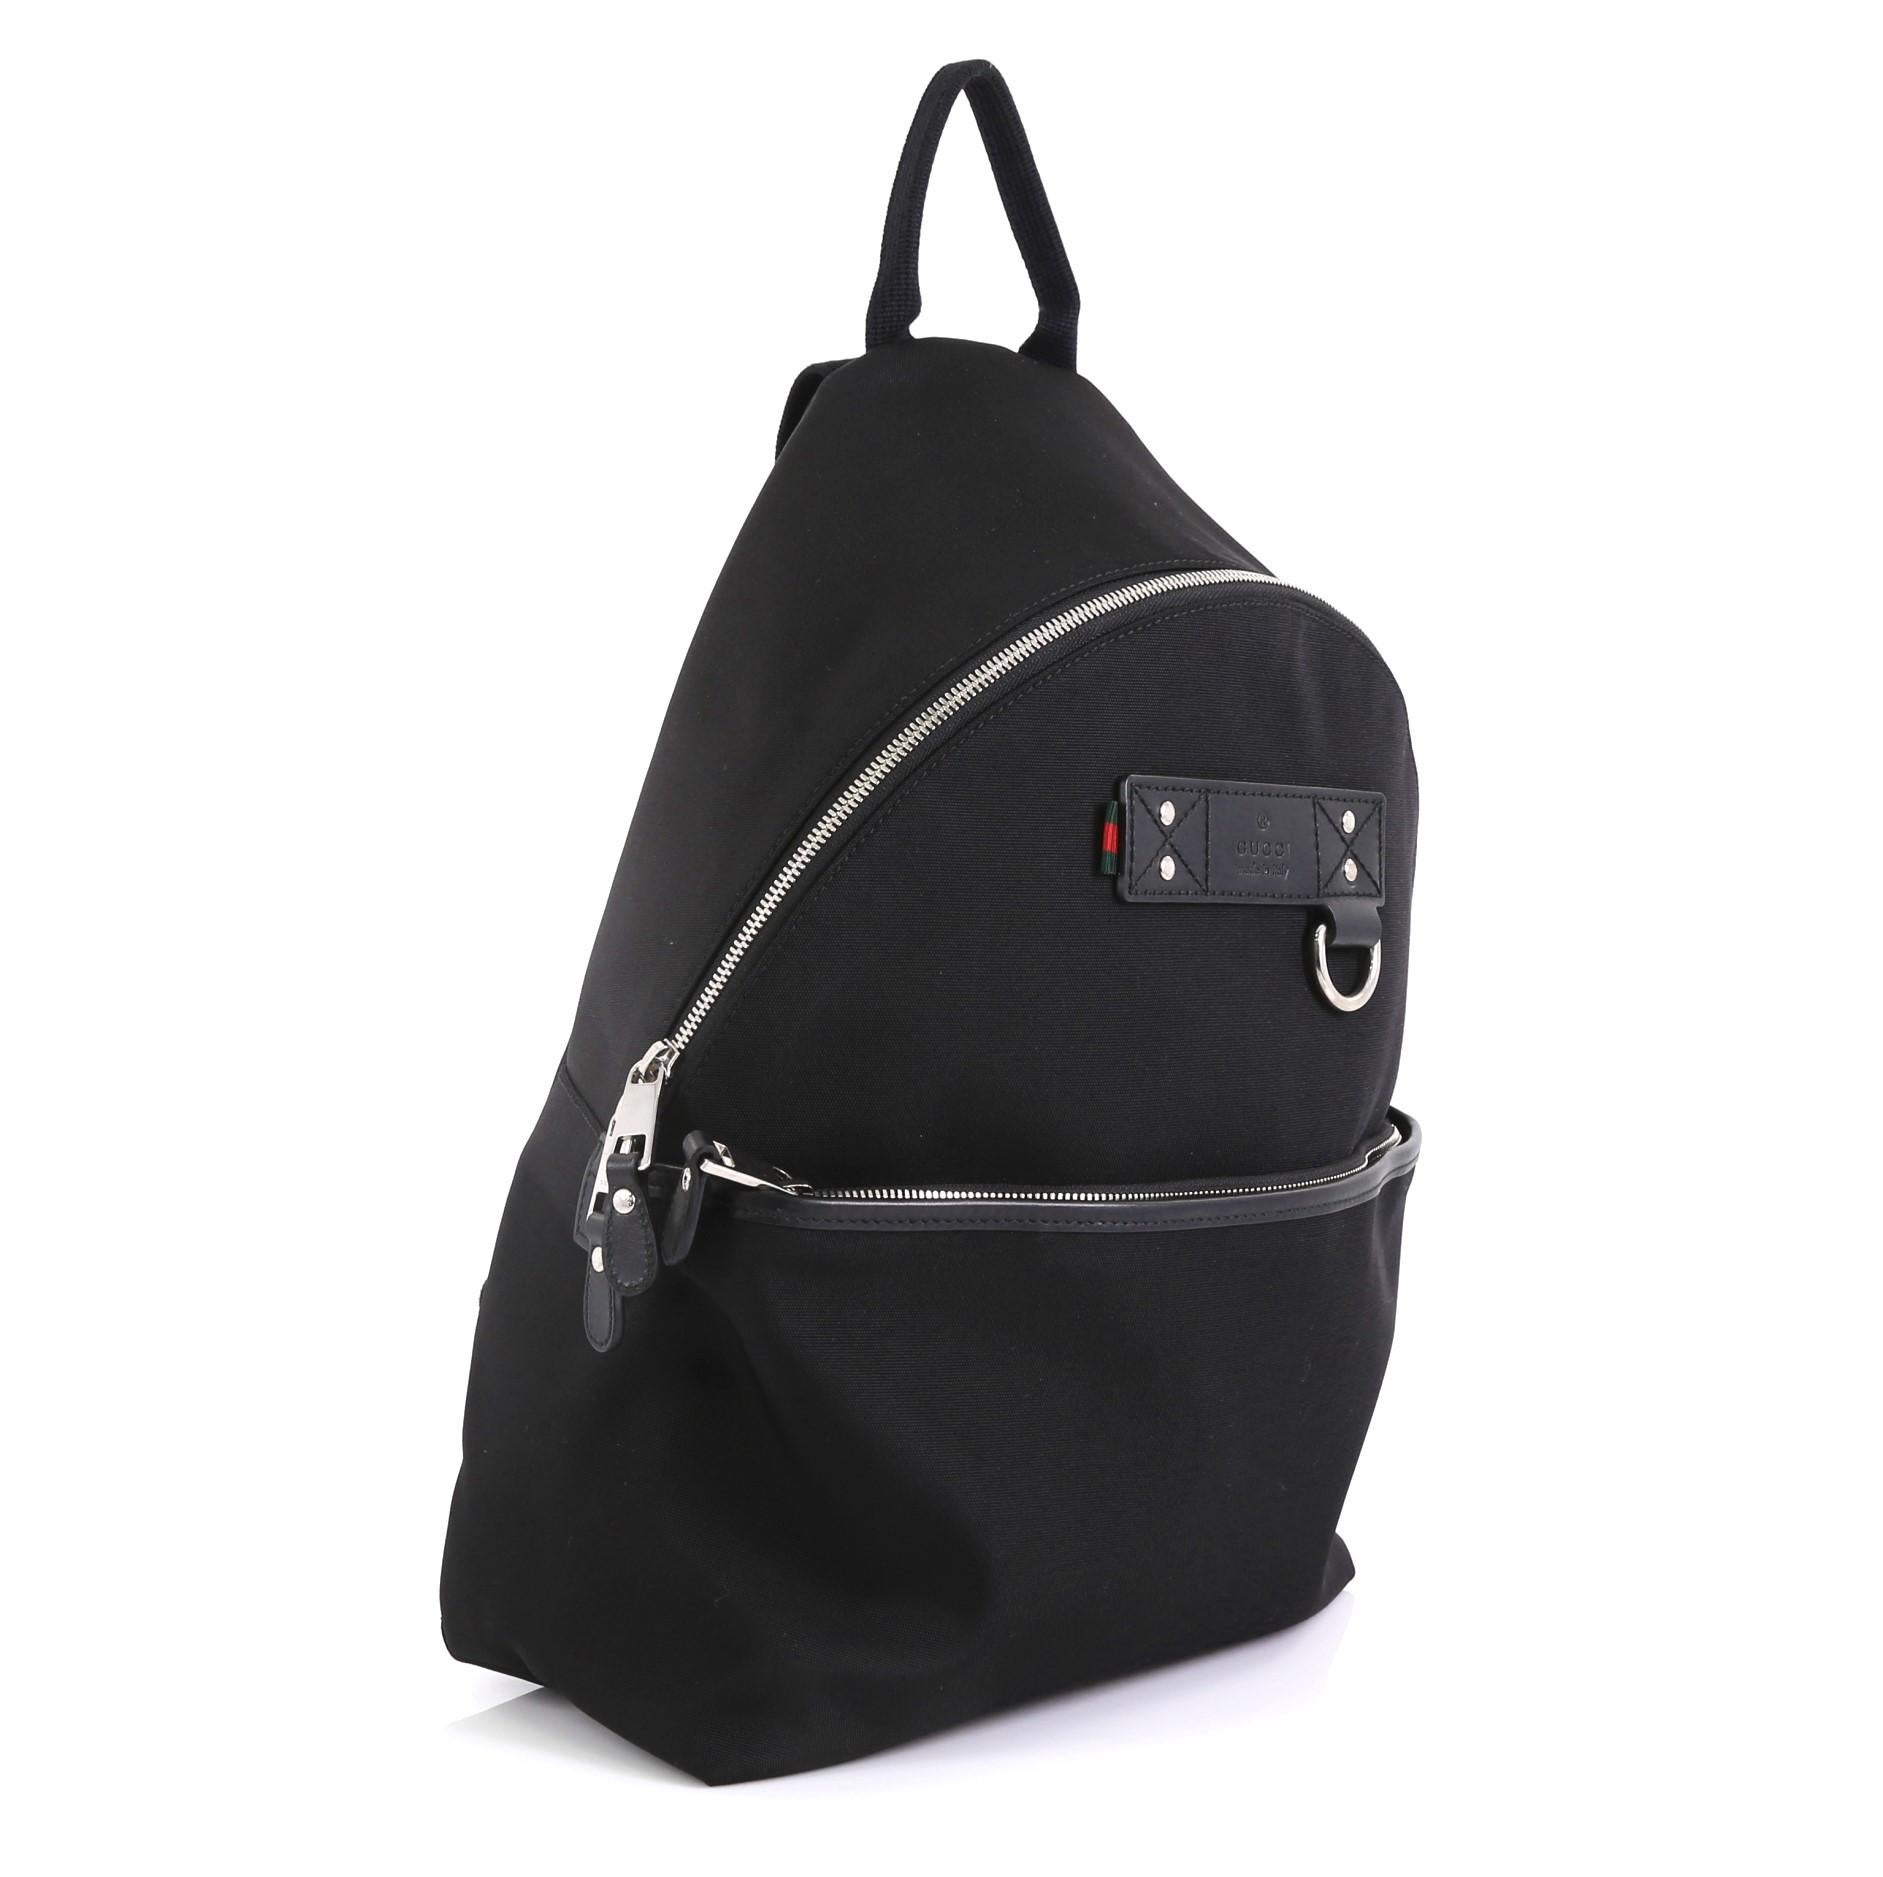 This Gucci Web Band Backpack Techno Canvas Medium, crafted from black canvas, features adjustable straps, front zip pocket and silver-tone hardware. Its zip closure opens to a black nylon interior with zip and slip pockets. 

Estimated Retail Price: